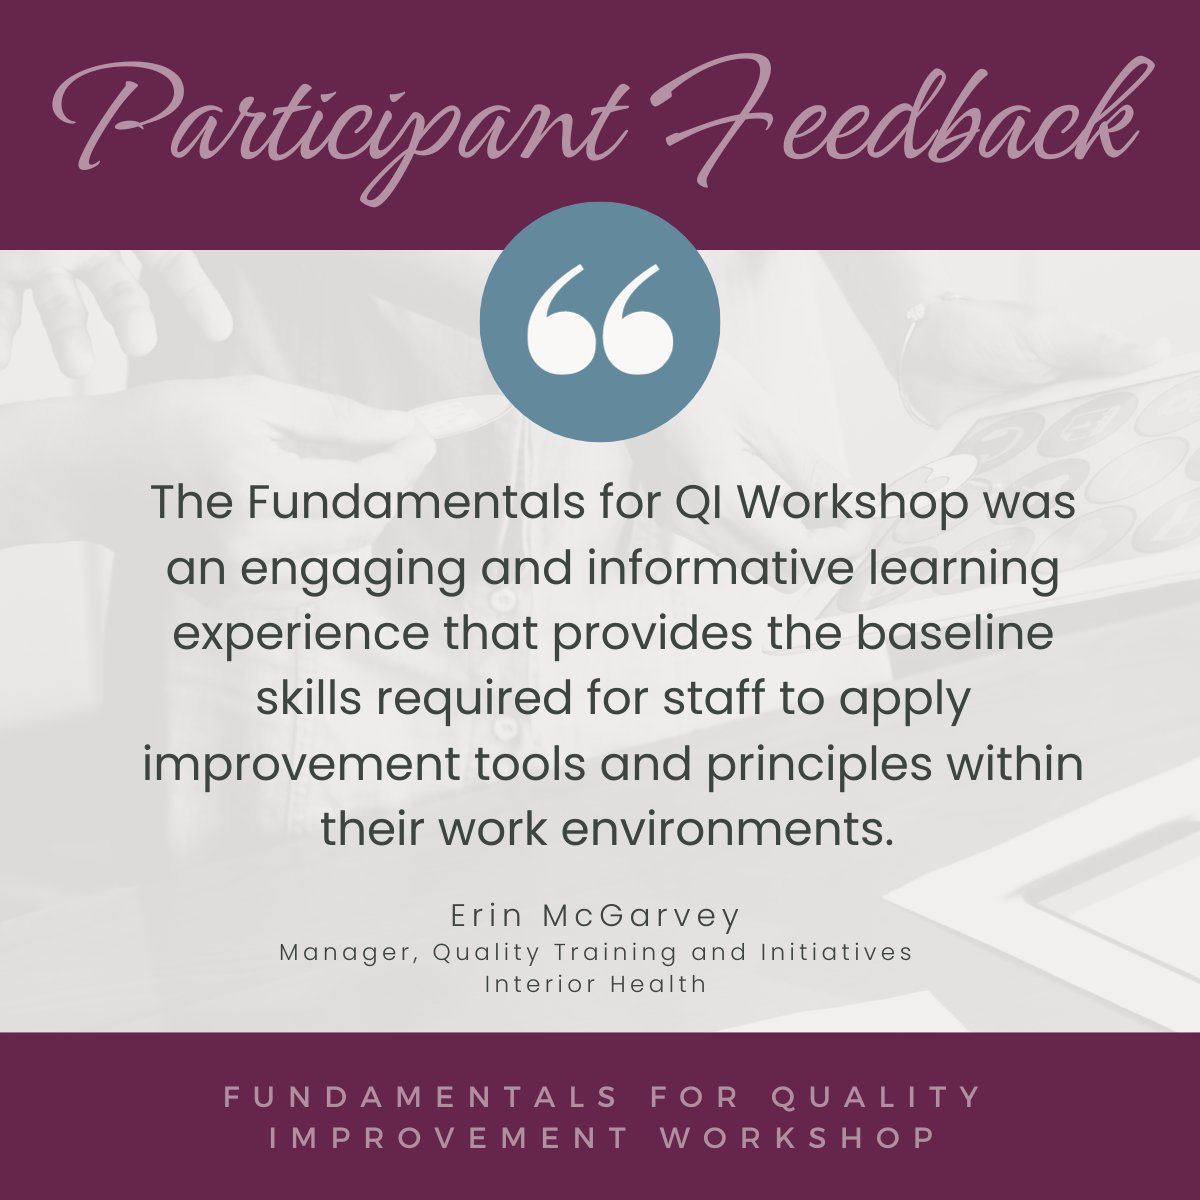 The Fundamentals for Quality Improvement Workshop introduces health care professionals to foundational QI principles and practices required to lead, implement, and sustain quality initiatives within their organization. Join us on February 8 in Vancouver: ow.ly/5cVc50QpLtj